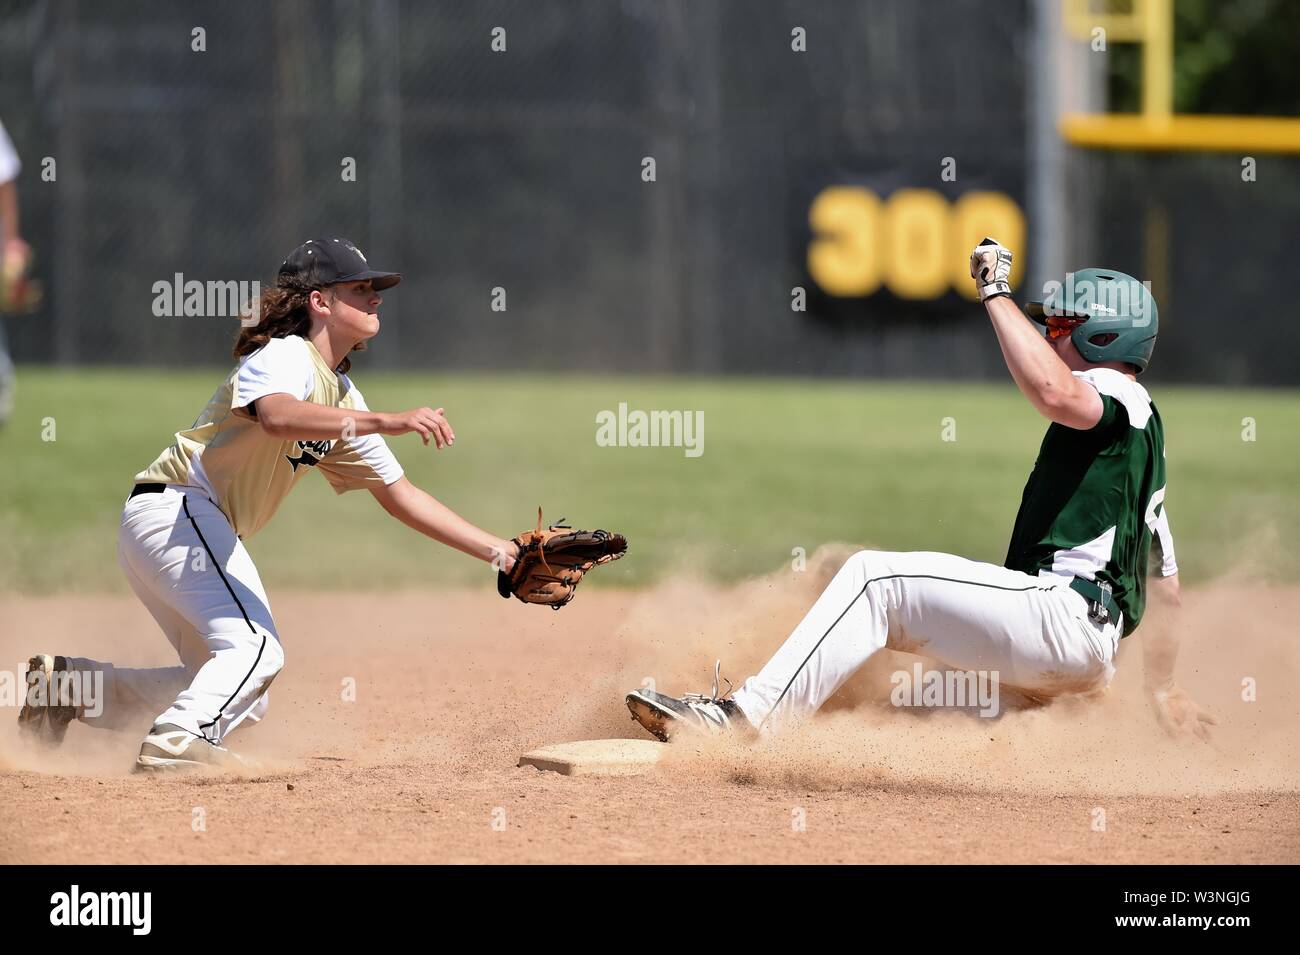 Runner sliding safely into second base with a steal as an infielder took a late throw from behind the bag. USA. Stock Photo